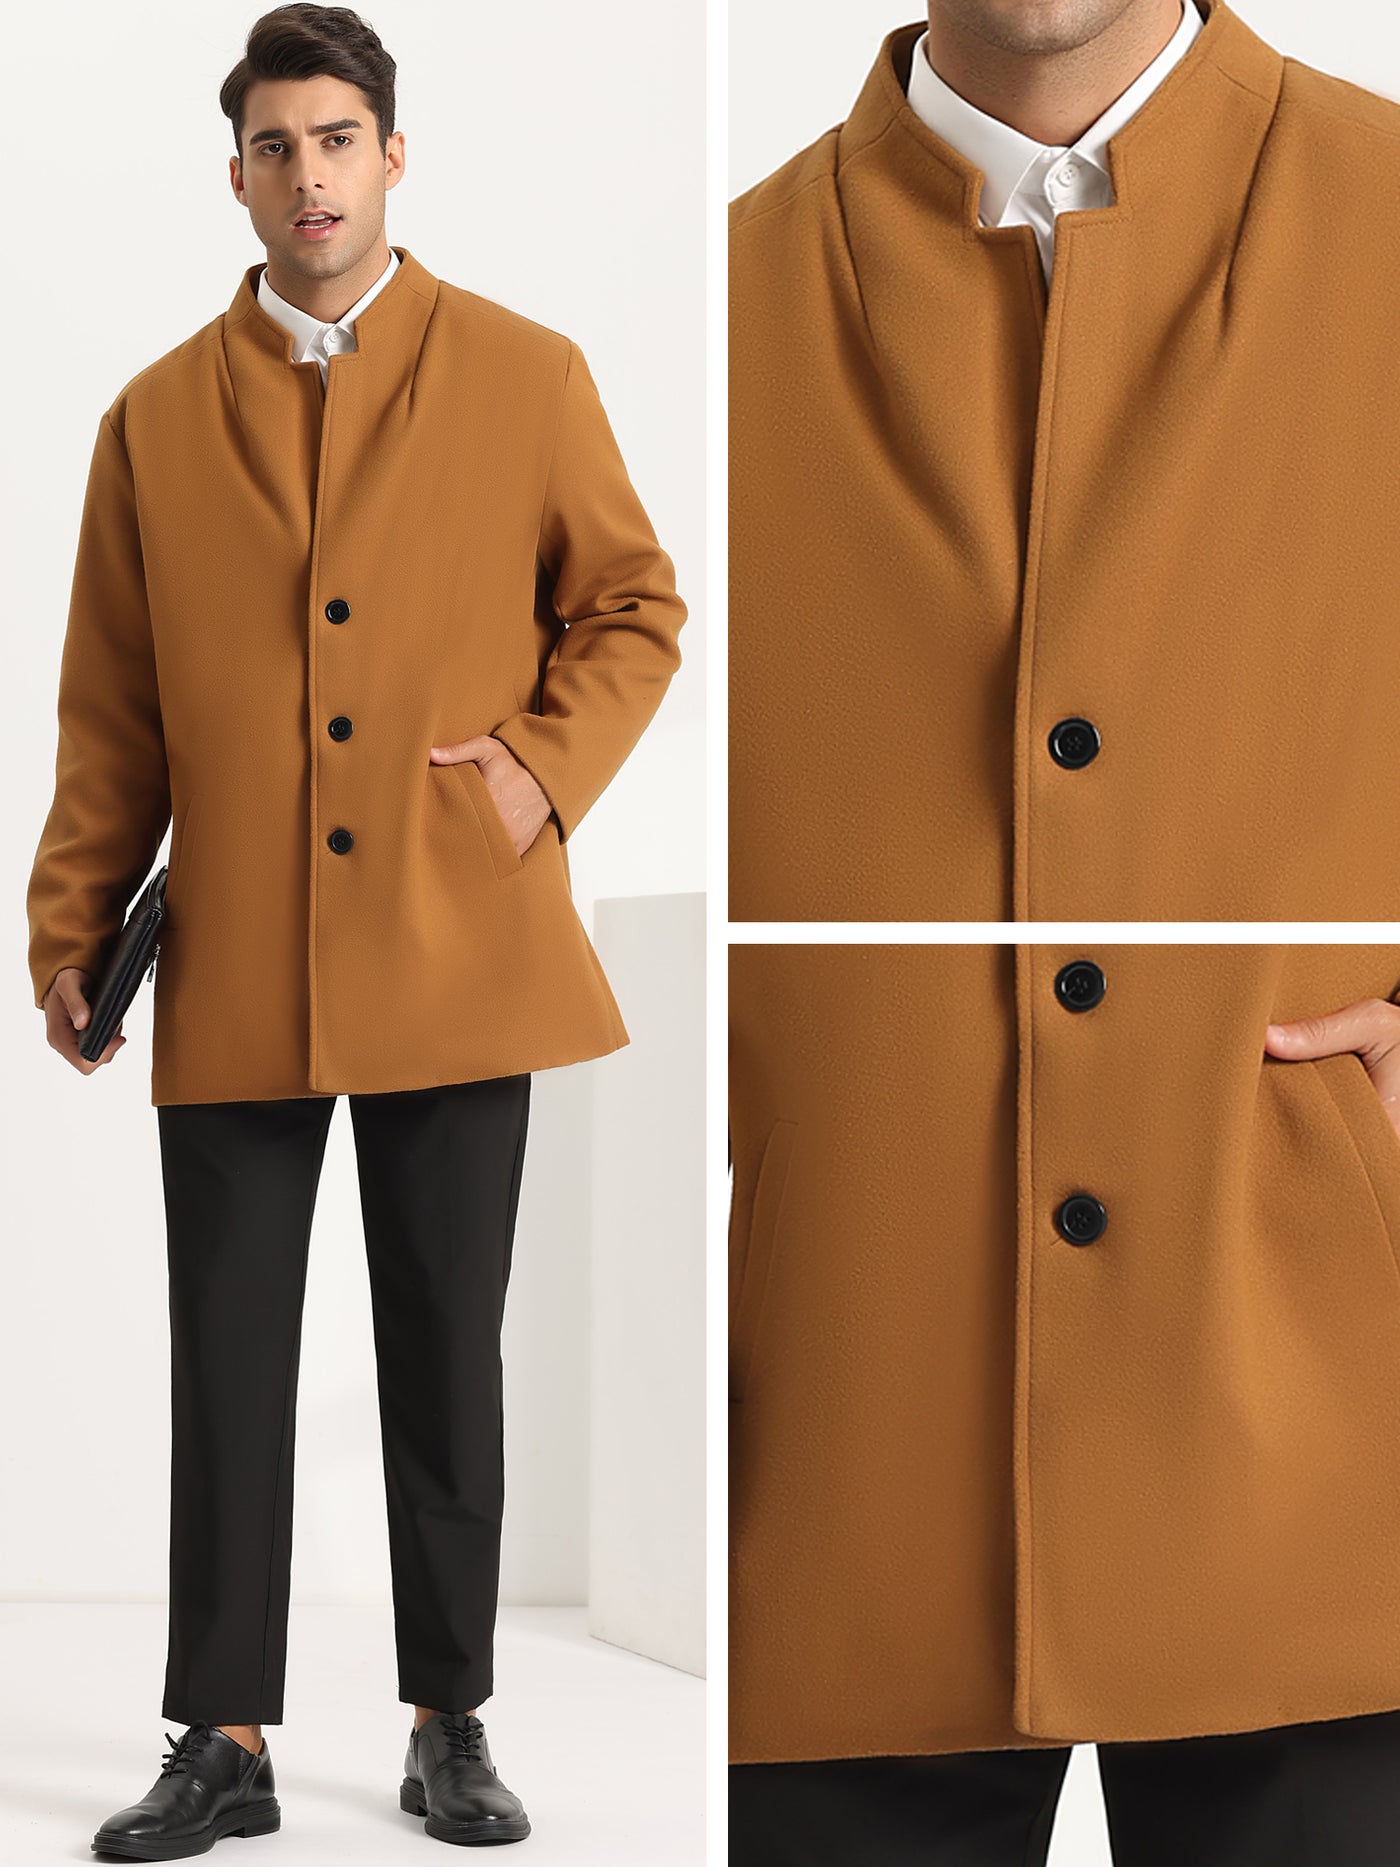 Bublédon Coats for Men's Winter Stand Collar Single Breasted Mid-Length Formal Overcoat